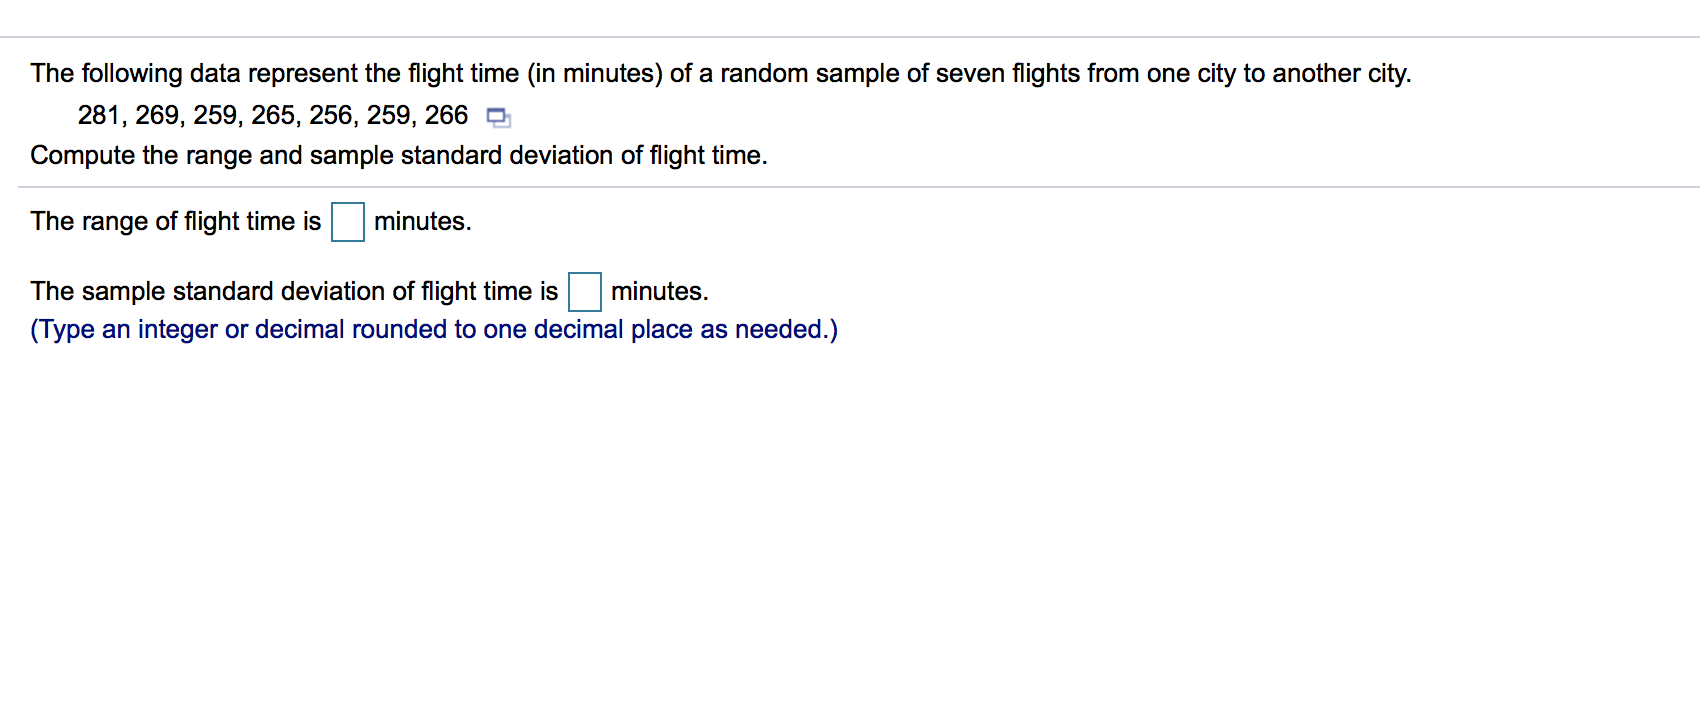 The following data represent the flight time (in minutes) of a random sample of seven flights from one city to another city.
281, 269, 259, 265, 256, 259, 266
Compute the range and sample standard deviation of flight time.
minutes
The range of flight time is
The sample standard deviation of flight time is
minutes.
(Type an integer or decimal rounded to one decimal place as needed.)
